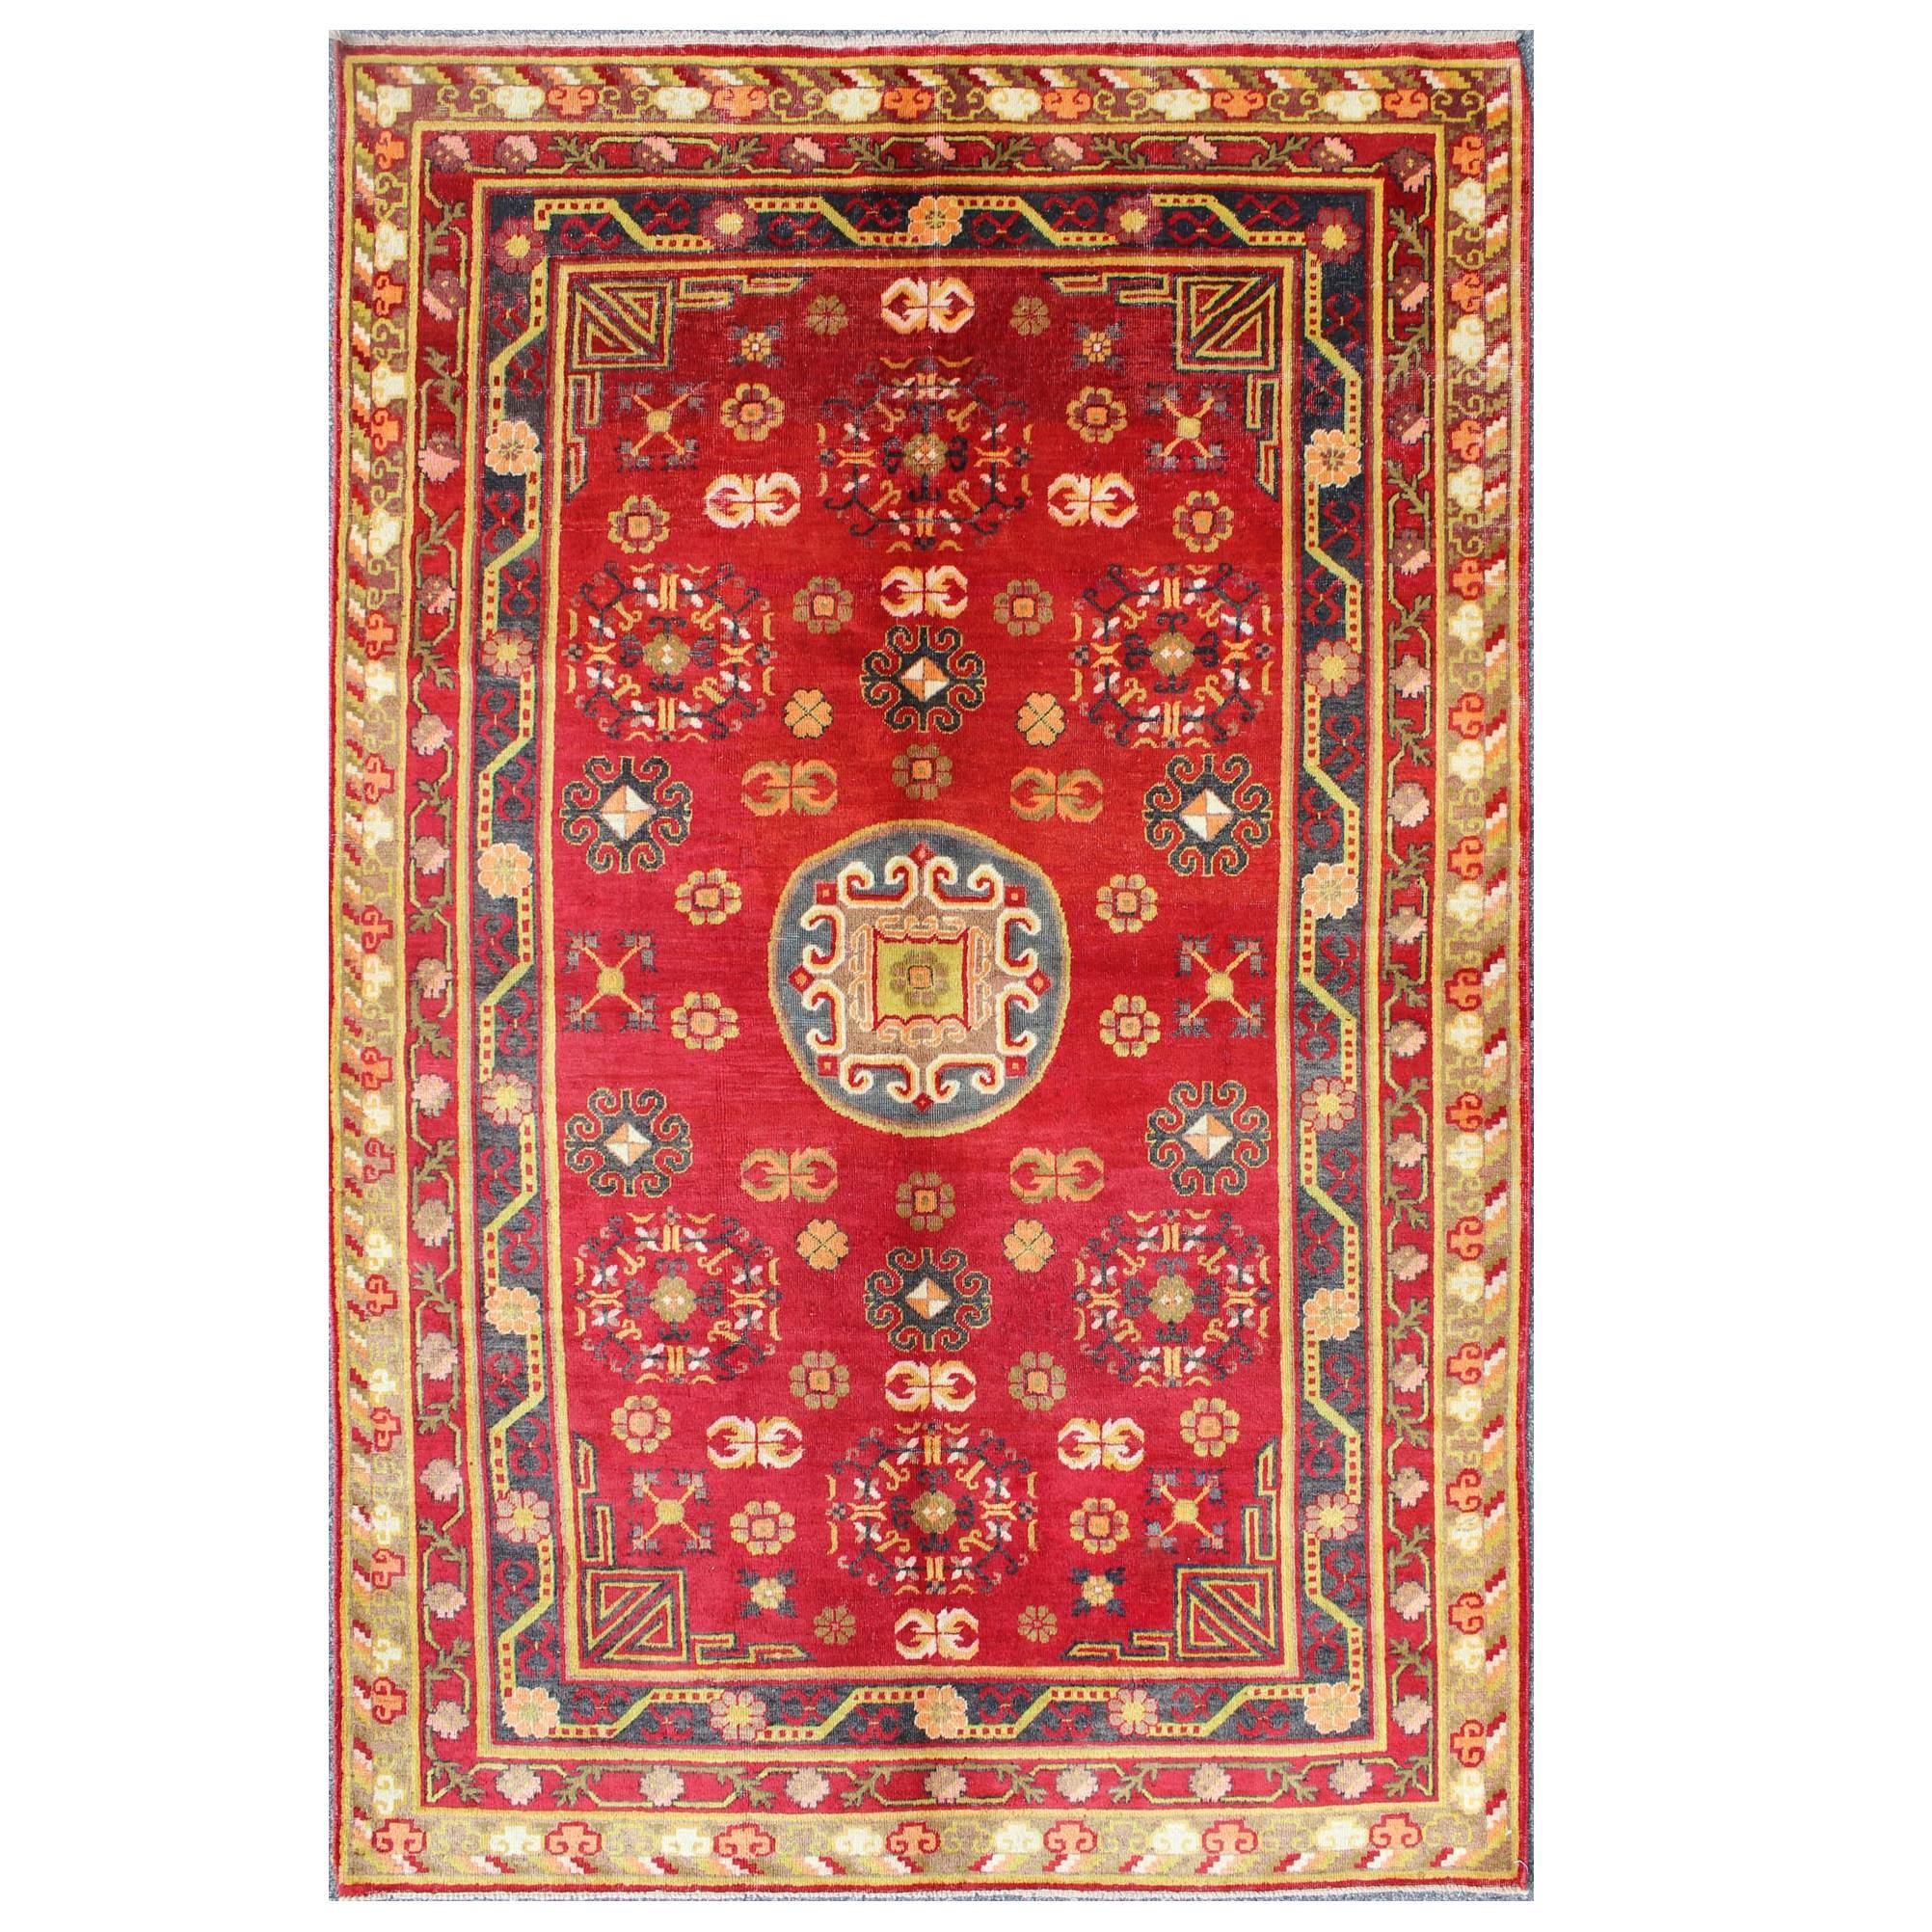 Antique Khotan Rug in Rich Red, Green and Charcoal Colors For Sale